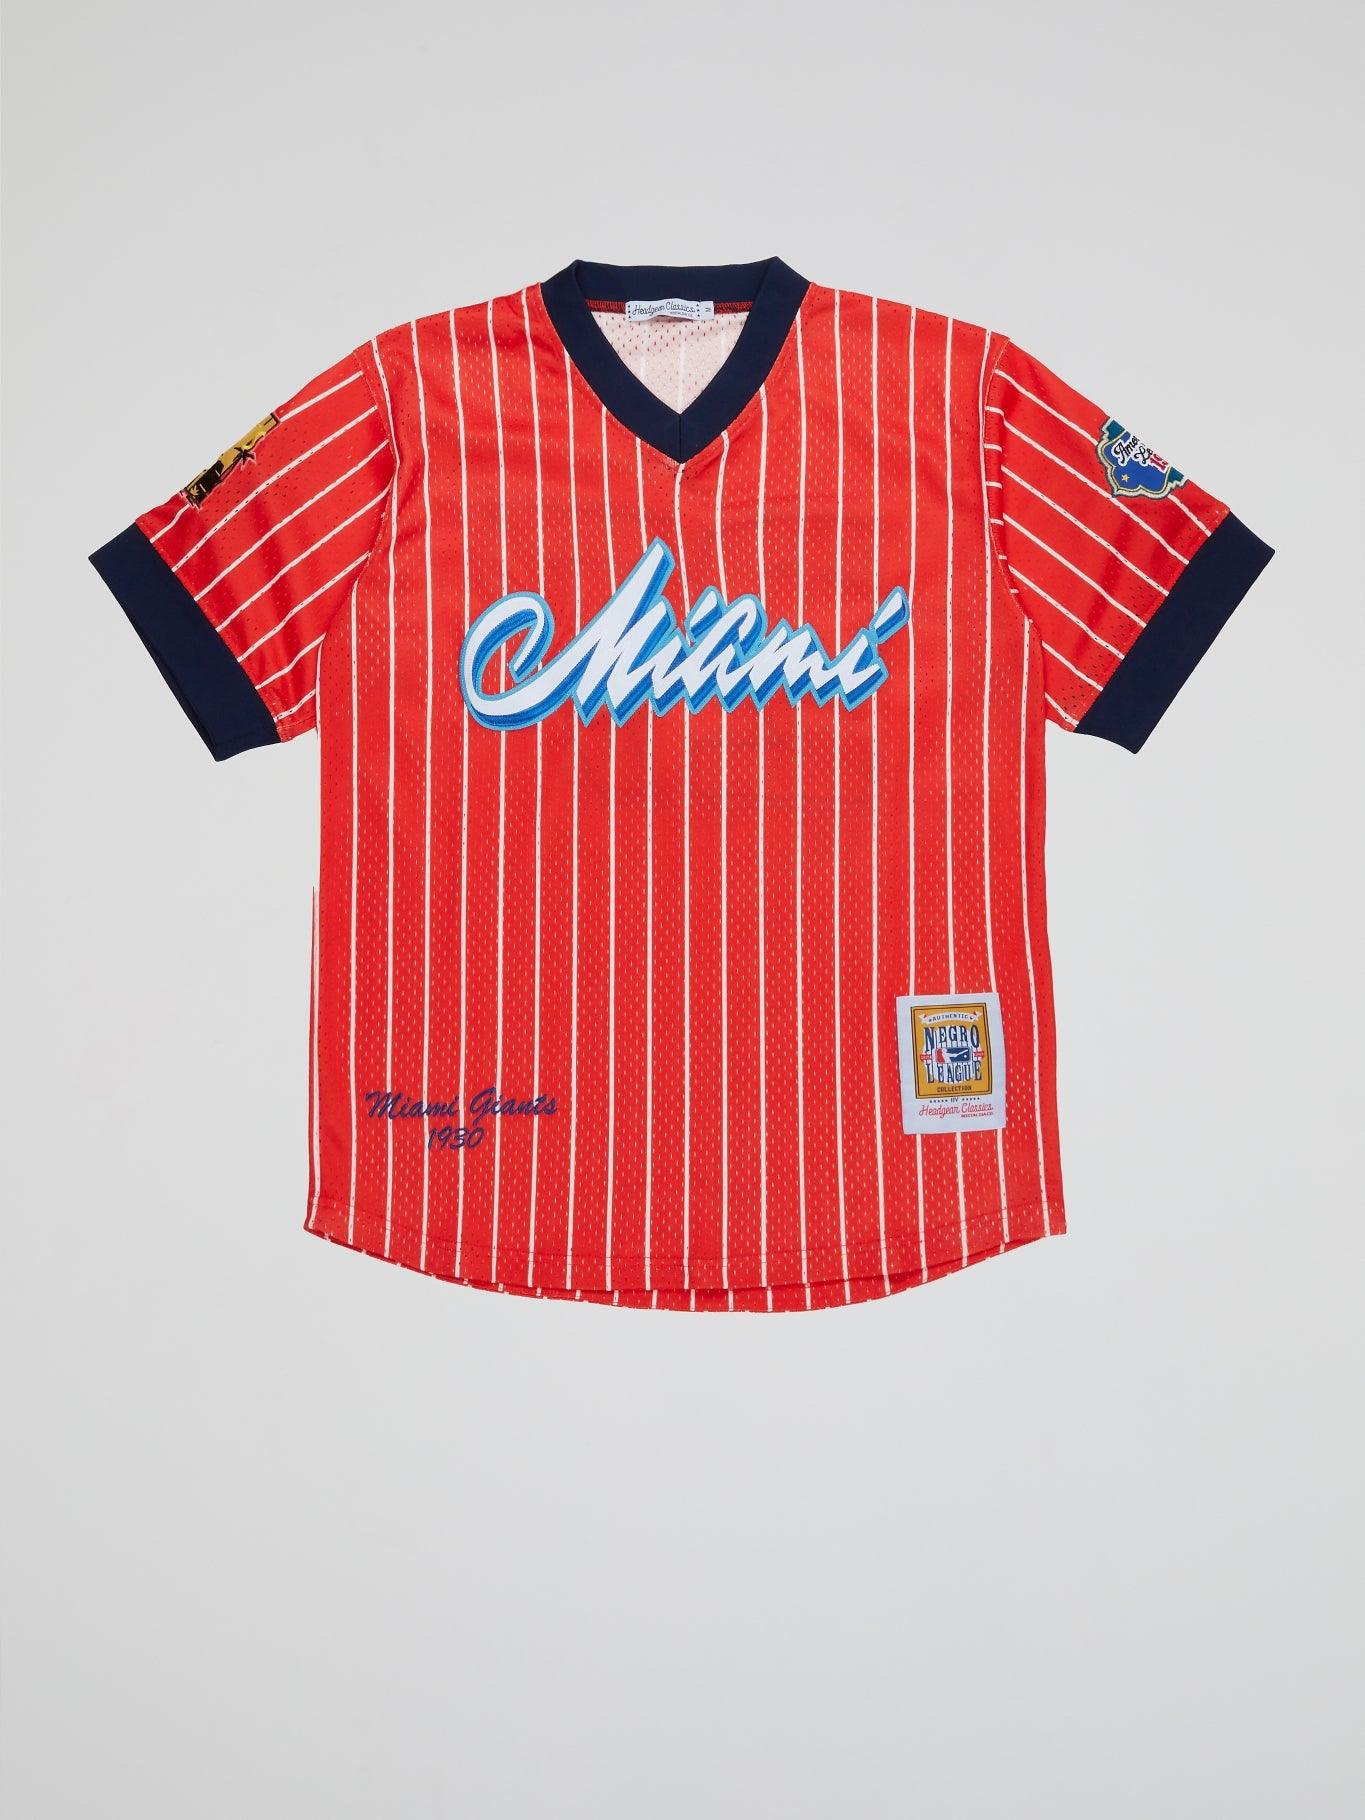 Miami Giants Red Pullover Pinstripe Jersey - B-Hype Society